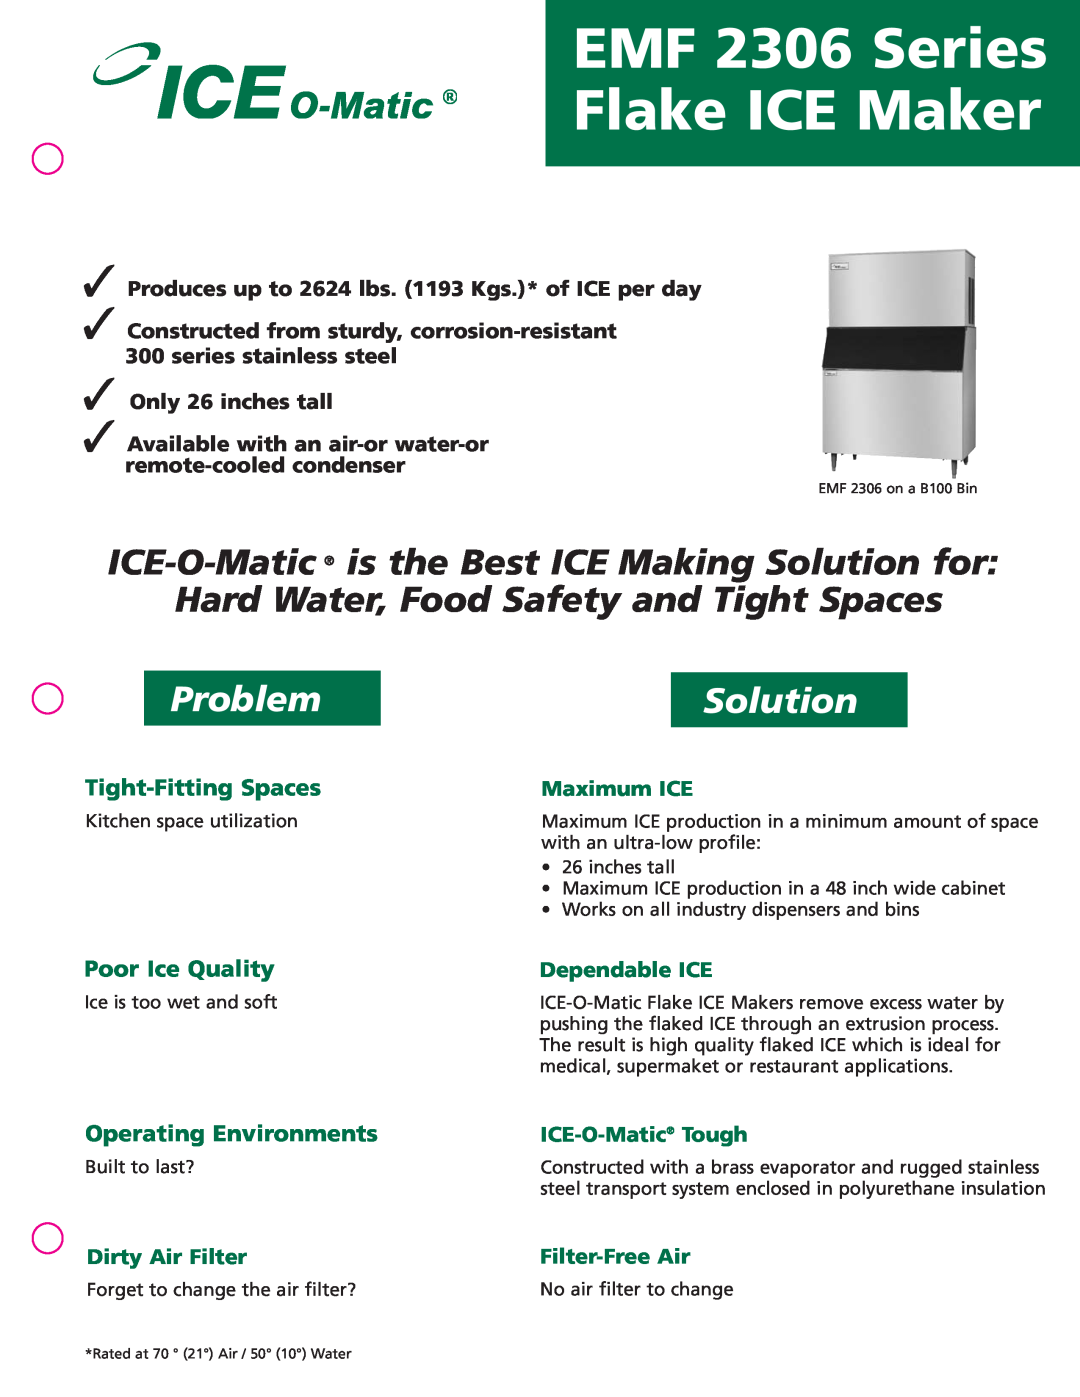 Ice-O-Matic manual EMF 2306 Series, Flake ICE Maker, Problem, Solution, Tight-Fitting Spaces, Poor Ice Quality 